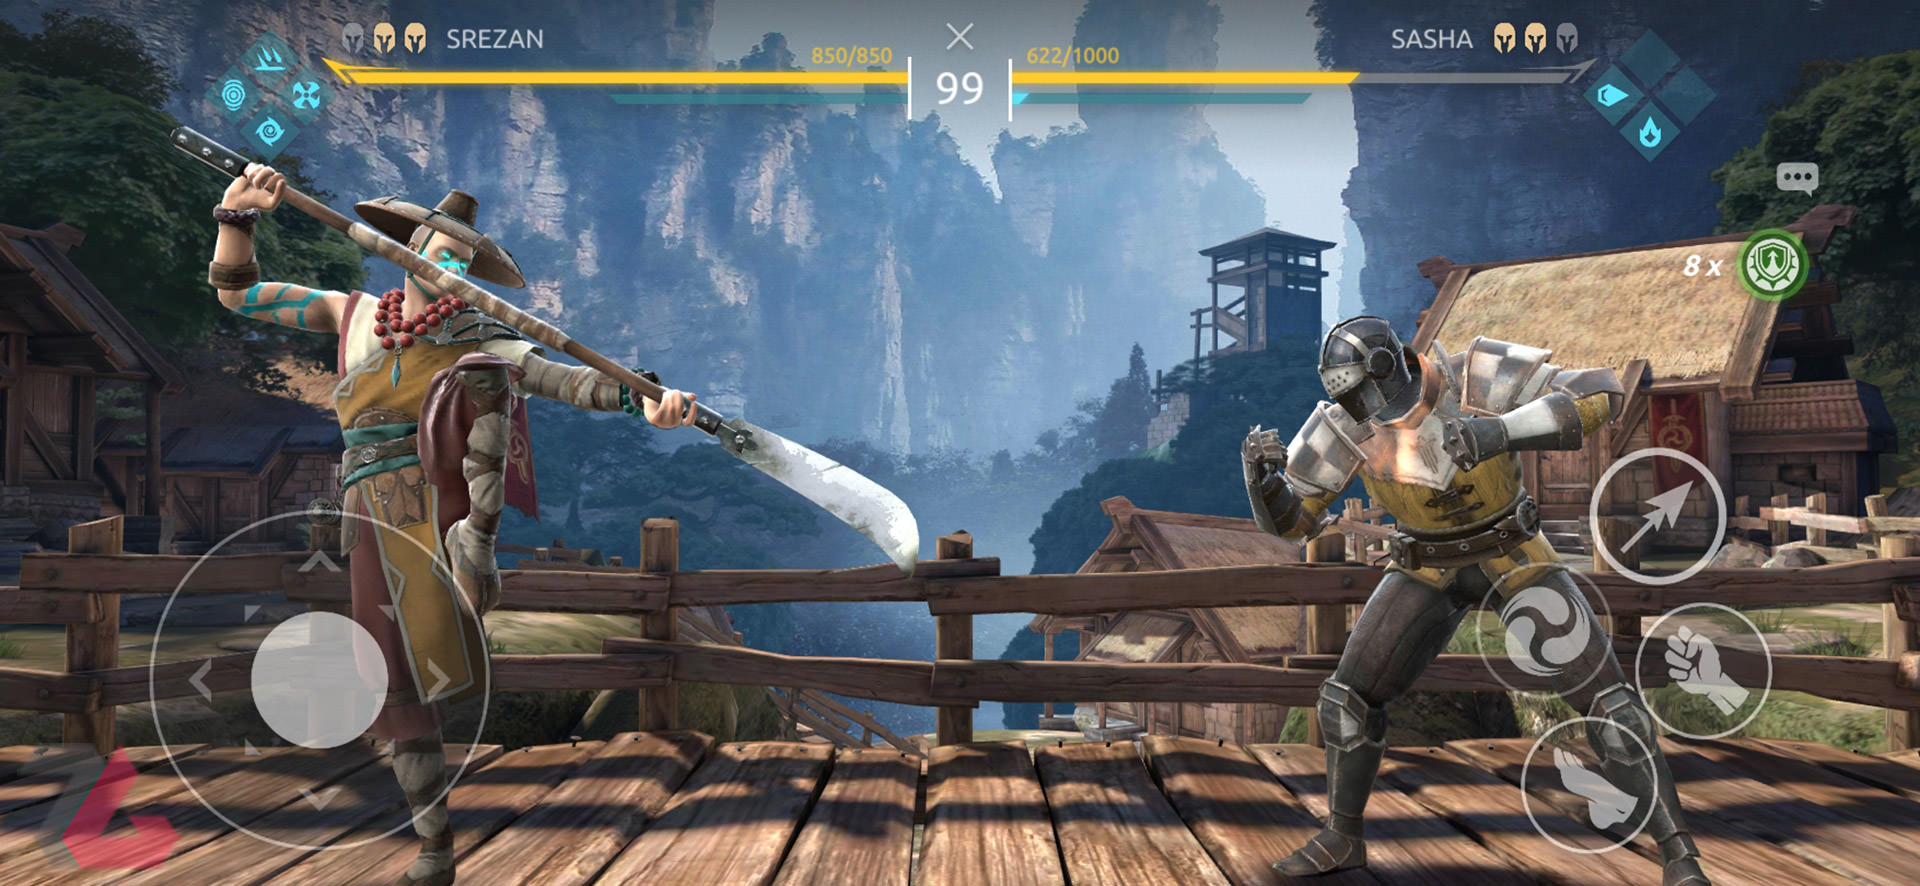 download free shadow fight 4 arena pvp download